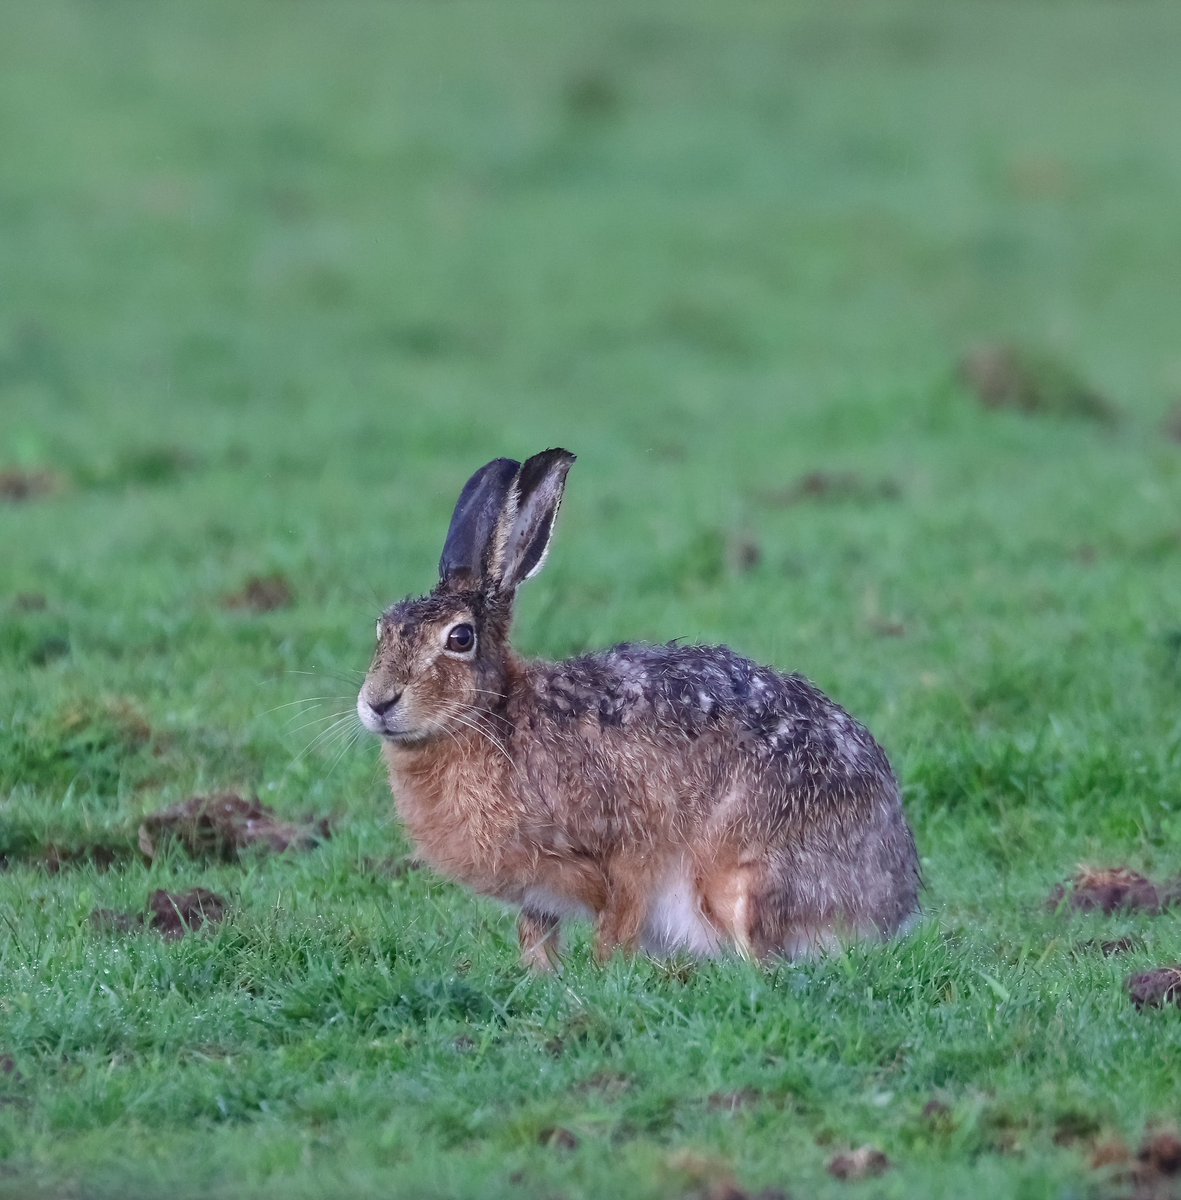 Hares not so bothered with me being around, getting used to me and the camera. #wildlife #nature #NaturePhotography #wildlifephotography #hare #brownhare